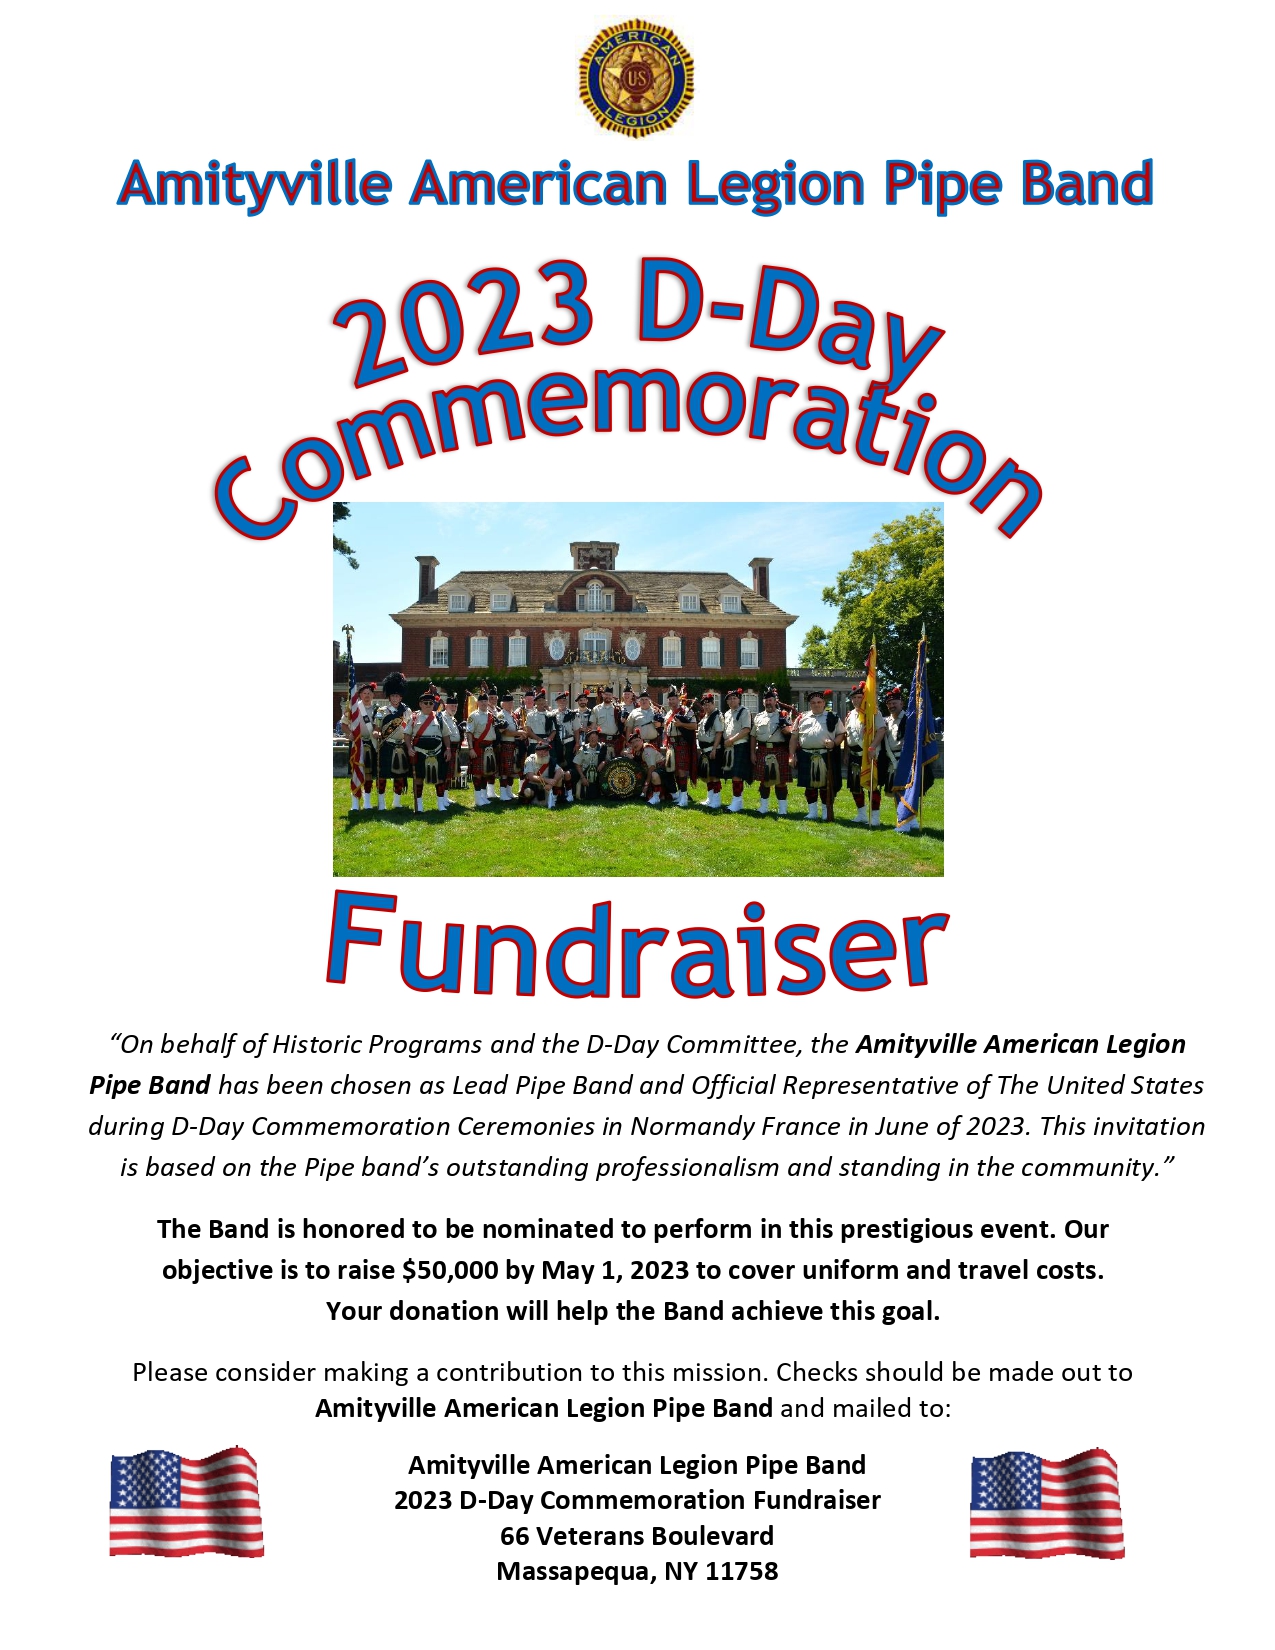 D-Day Commemoration Fundraiser @ Amityville American Legion Pipe Band